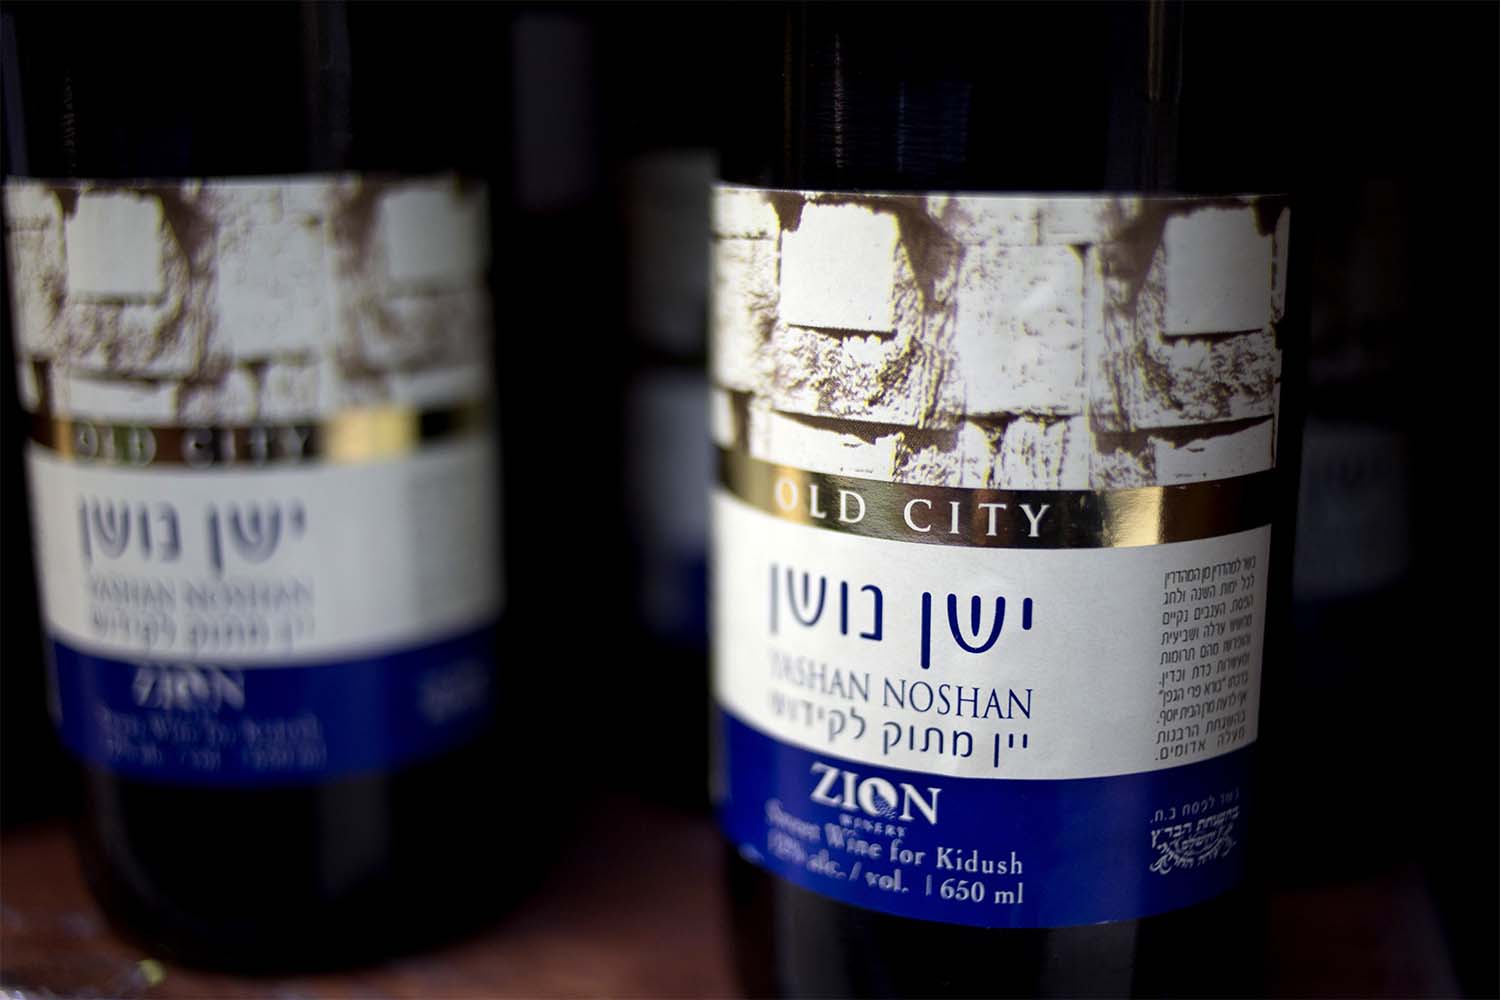 The EU’s top court ruled in 2019 that EU countries must identify products made in Israeli settlements on their labels